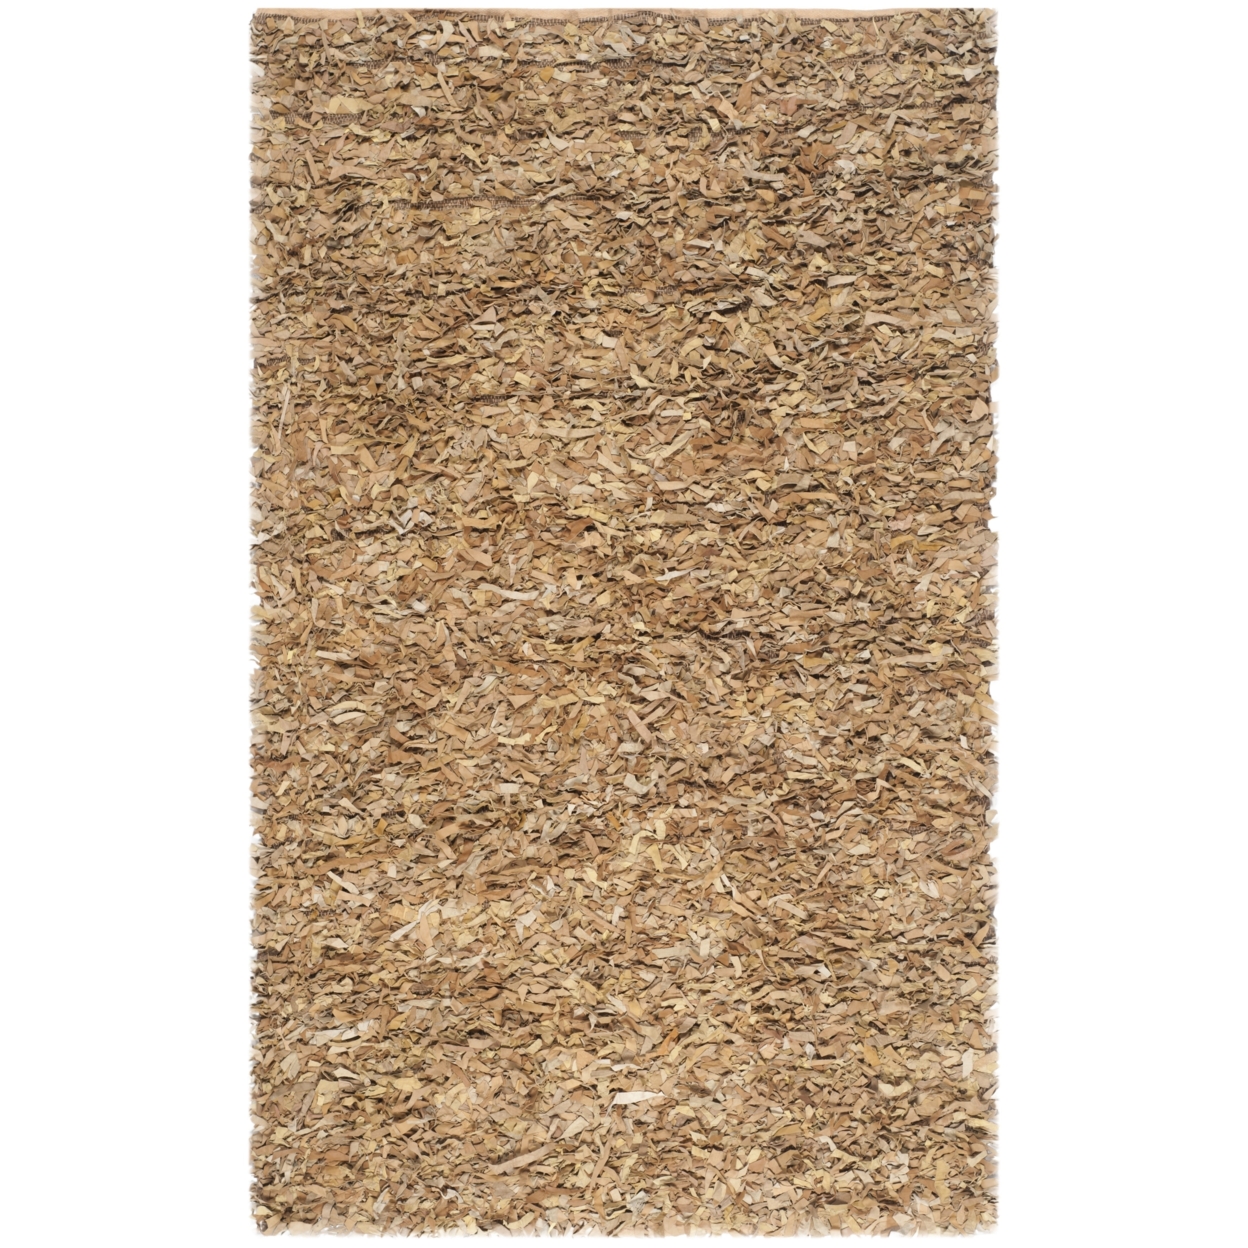 SAFAVIEH Leather Shag LSG511G Hand-knotted Light Gold Rug - 5' X 8'